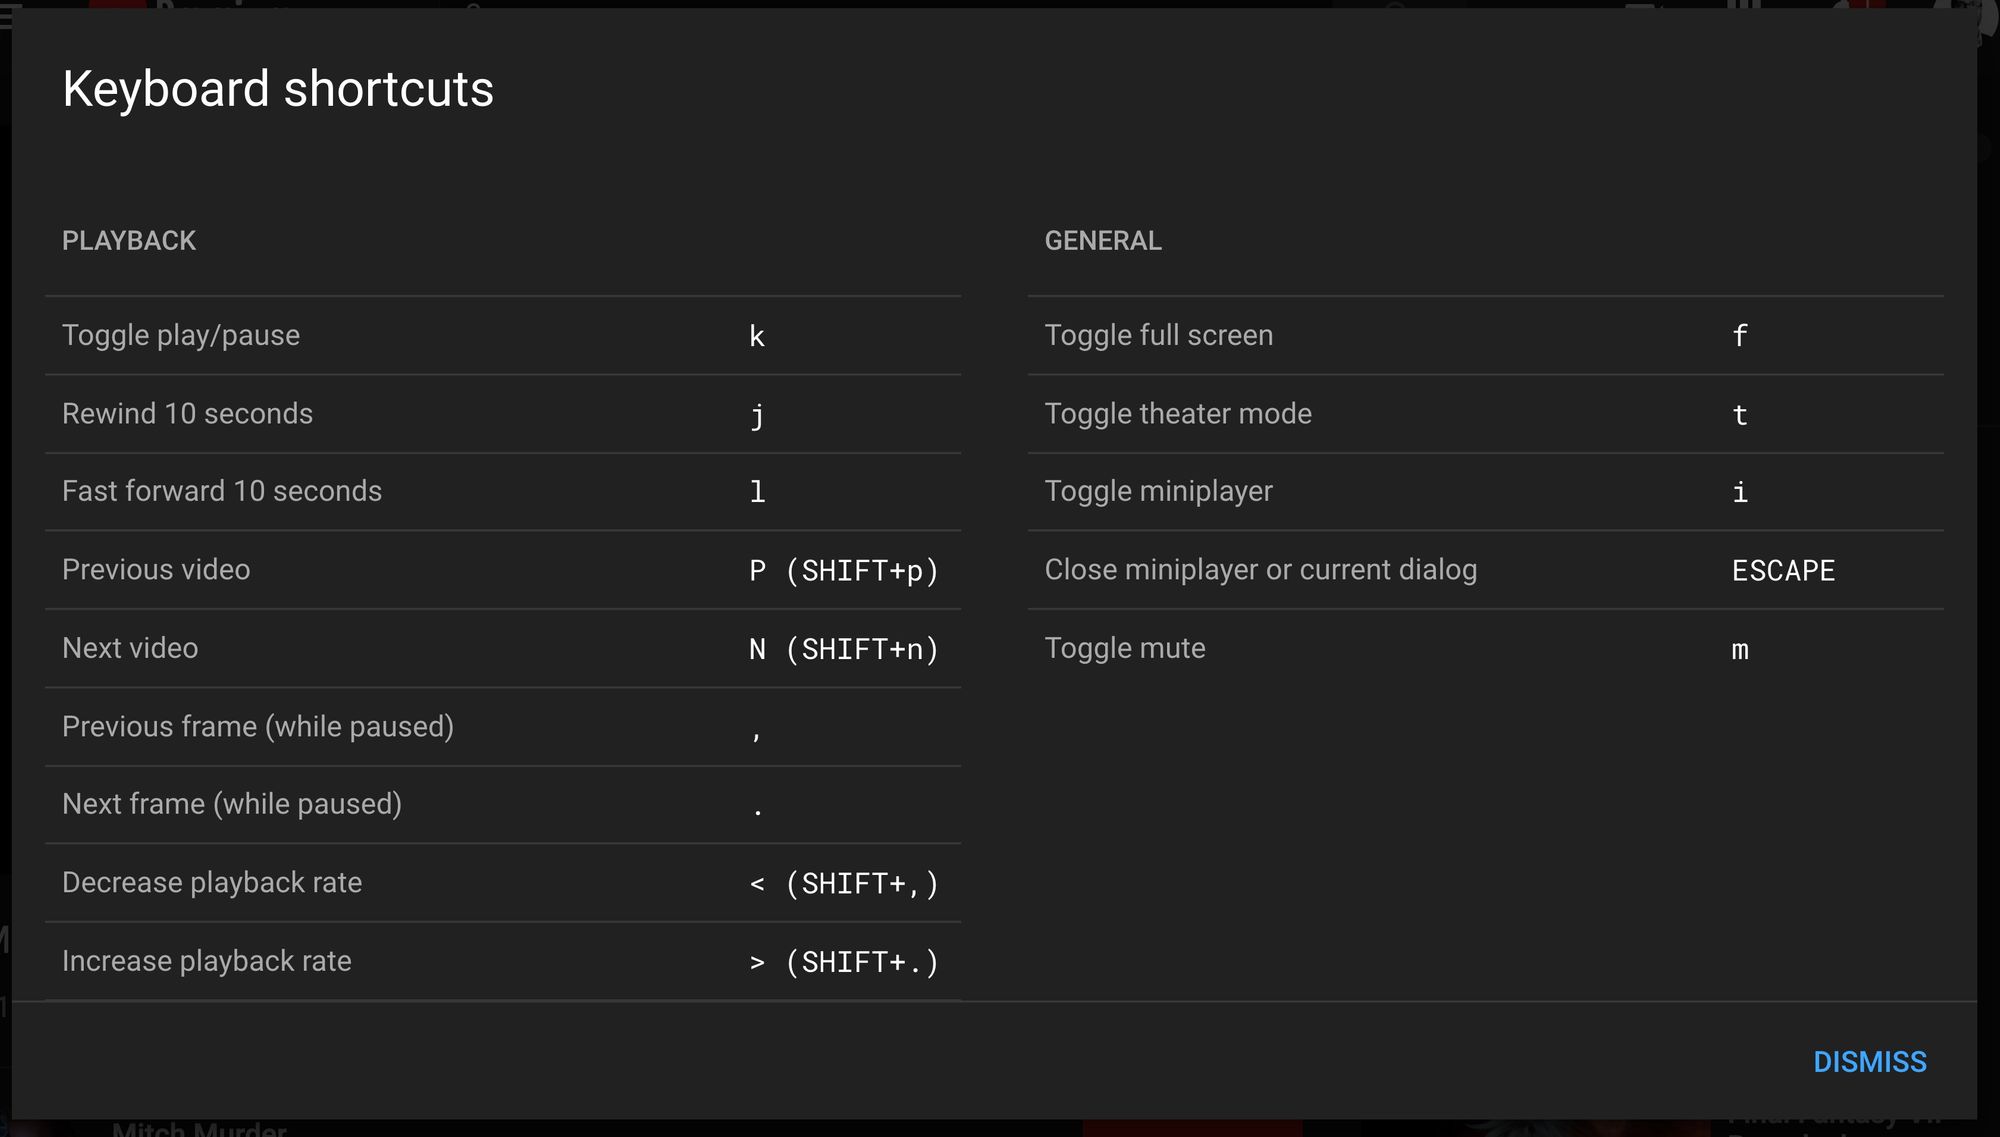 Learn YouTube Keyboard Shortcuts Like a Pro – Frame-by-Frame, Repeat, Playback Speed, Subtitles, and More